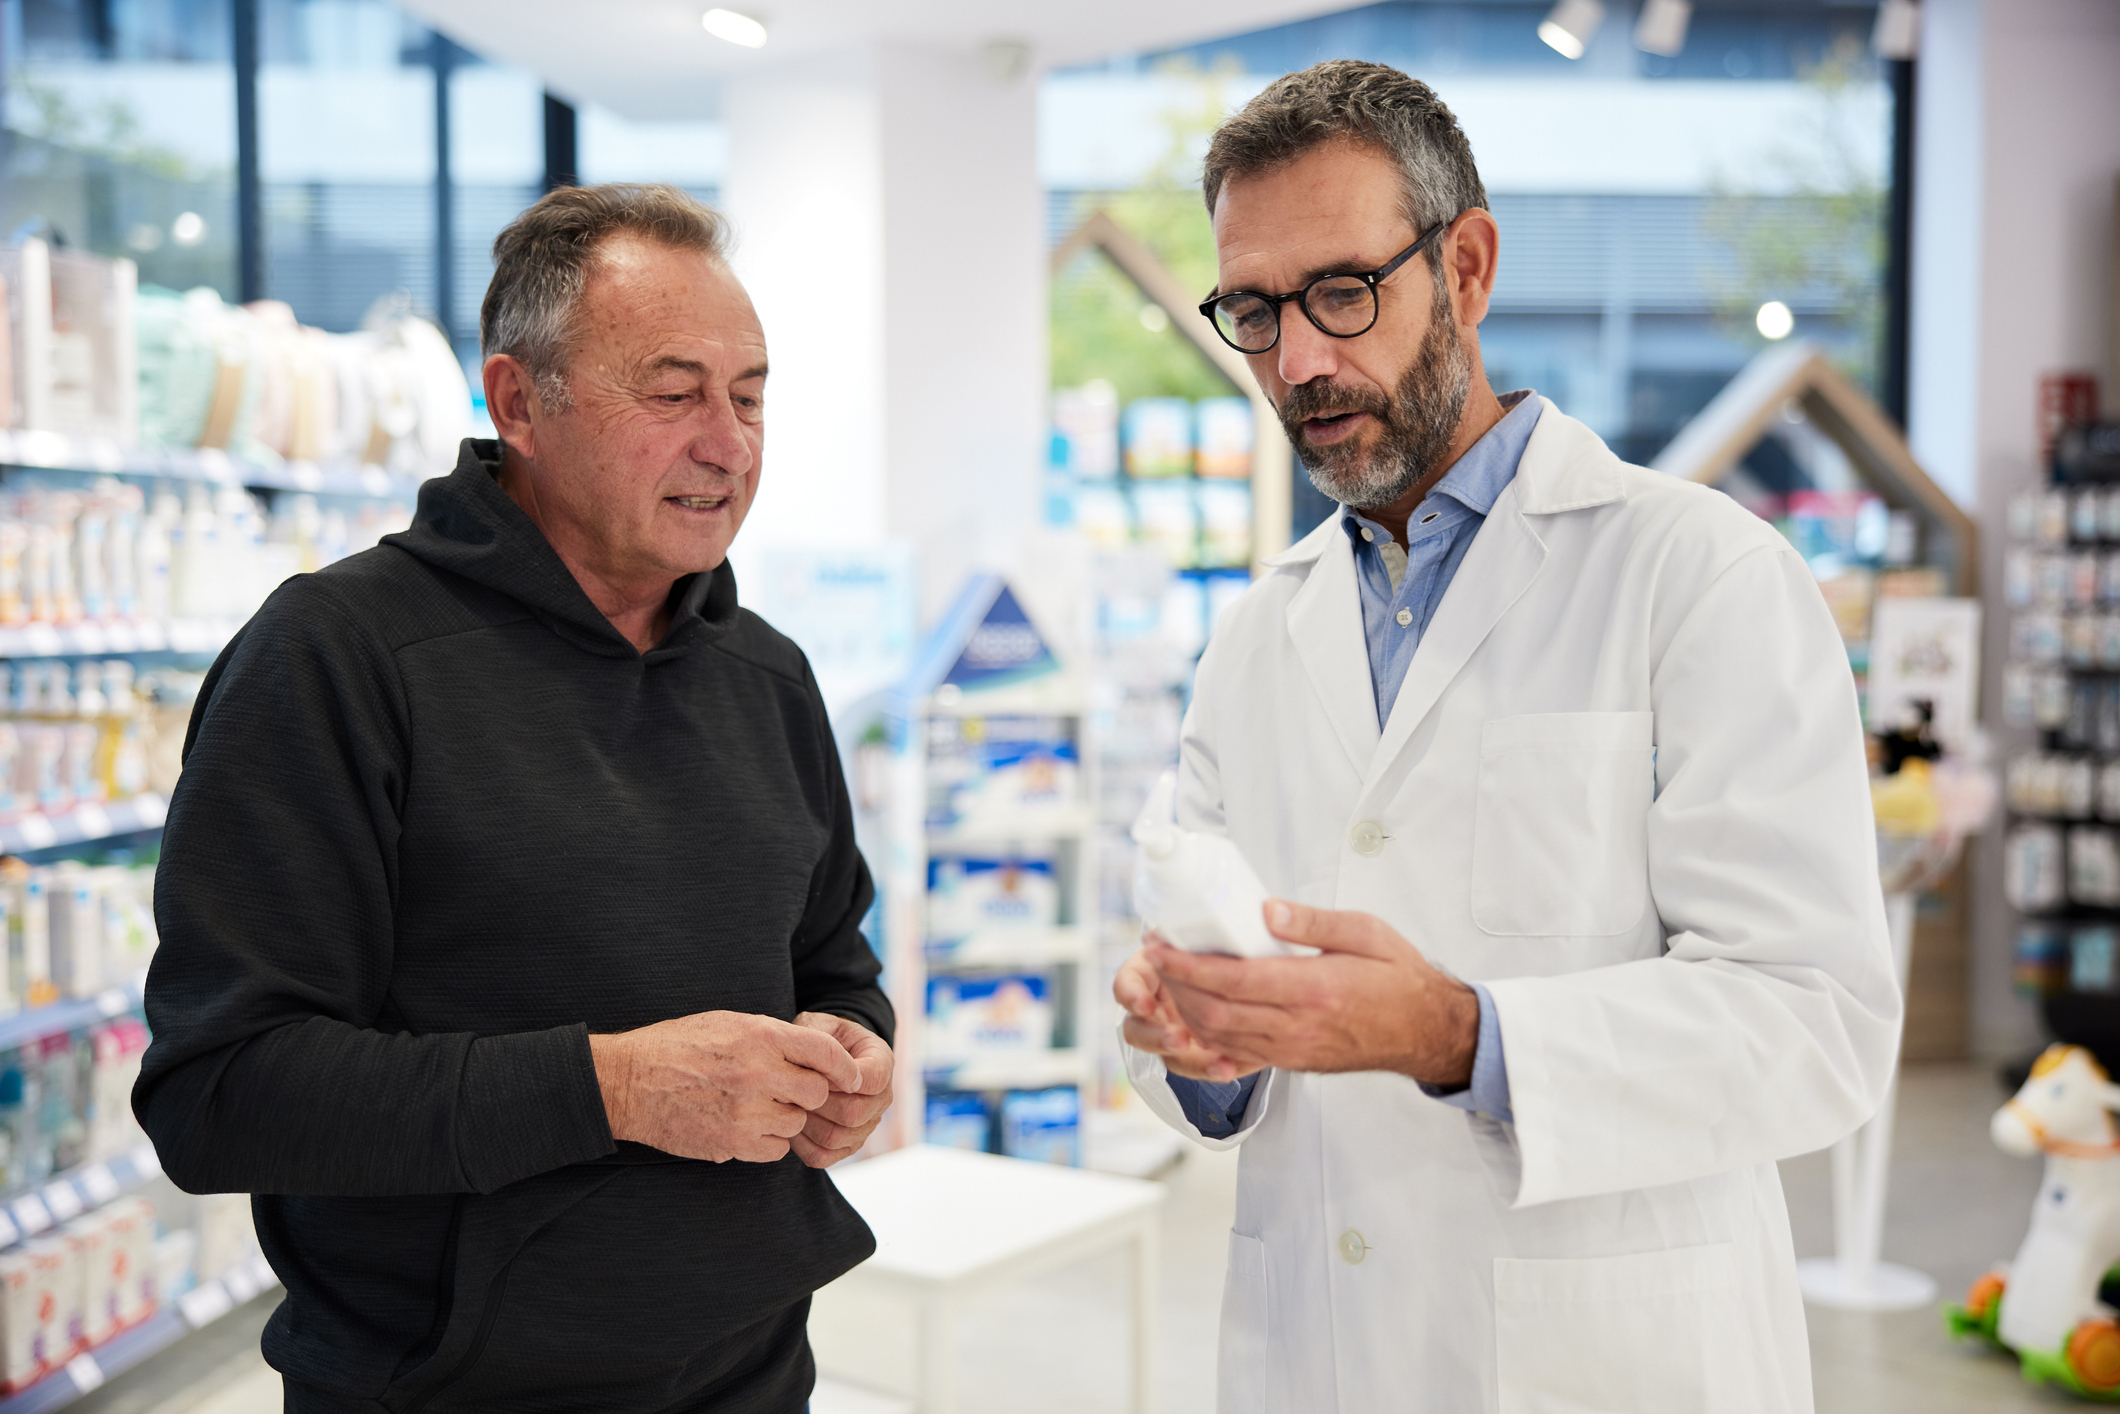 Pharmacist able to provide excellent patient care through Supplylogix software integrations